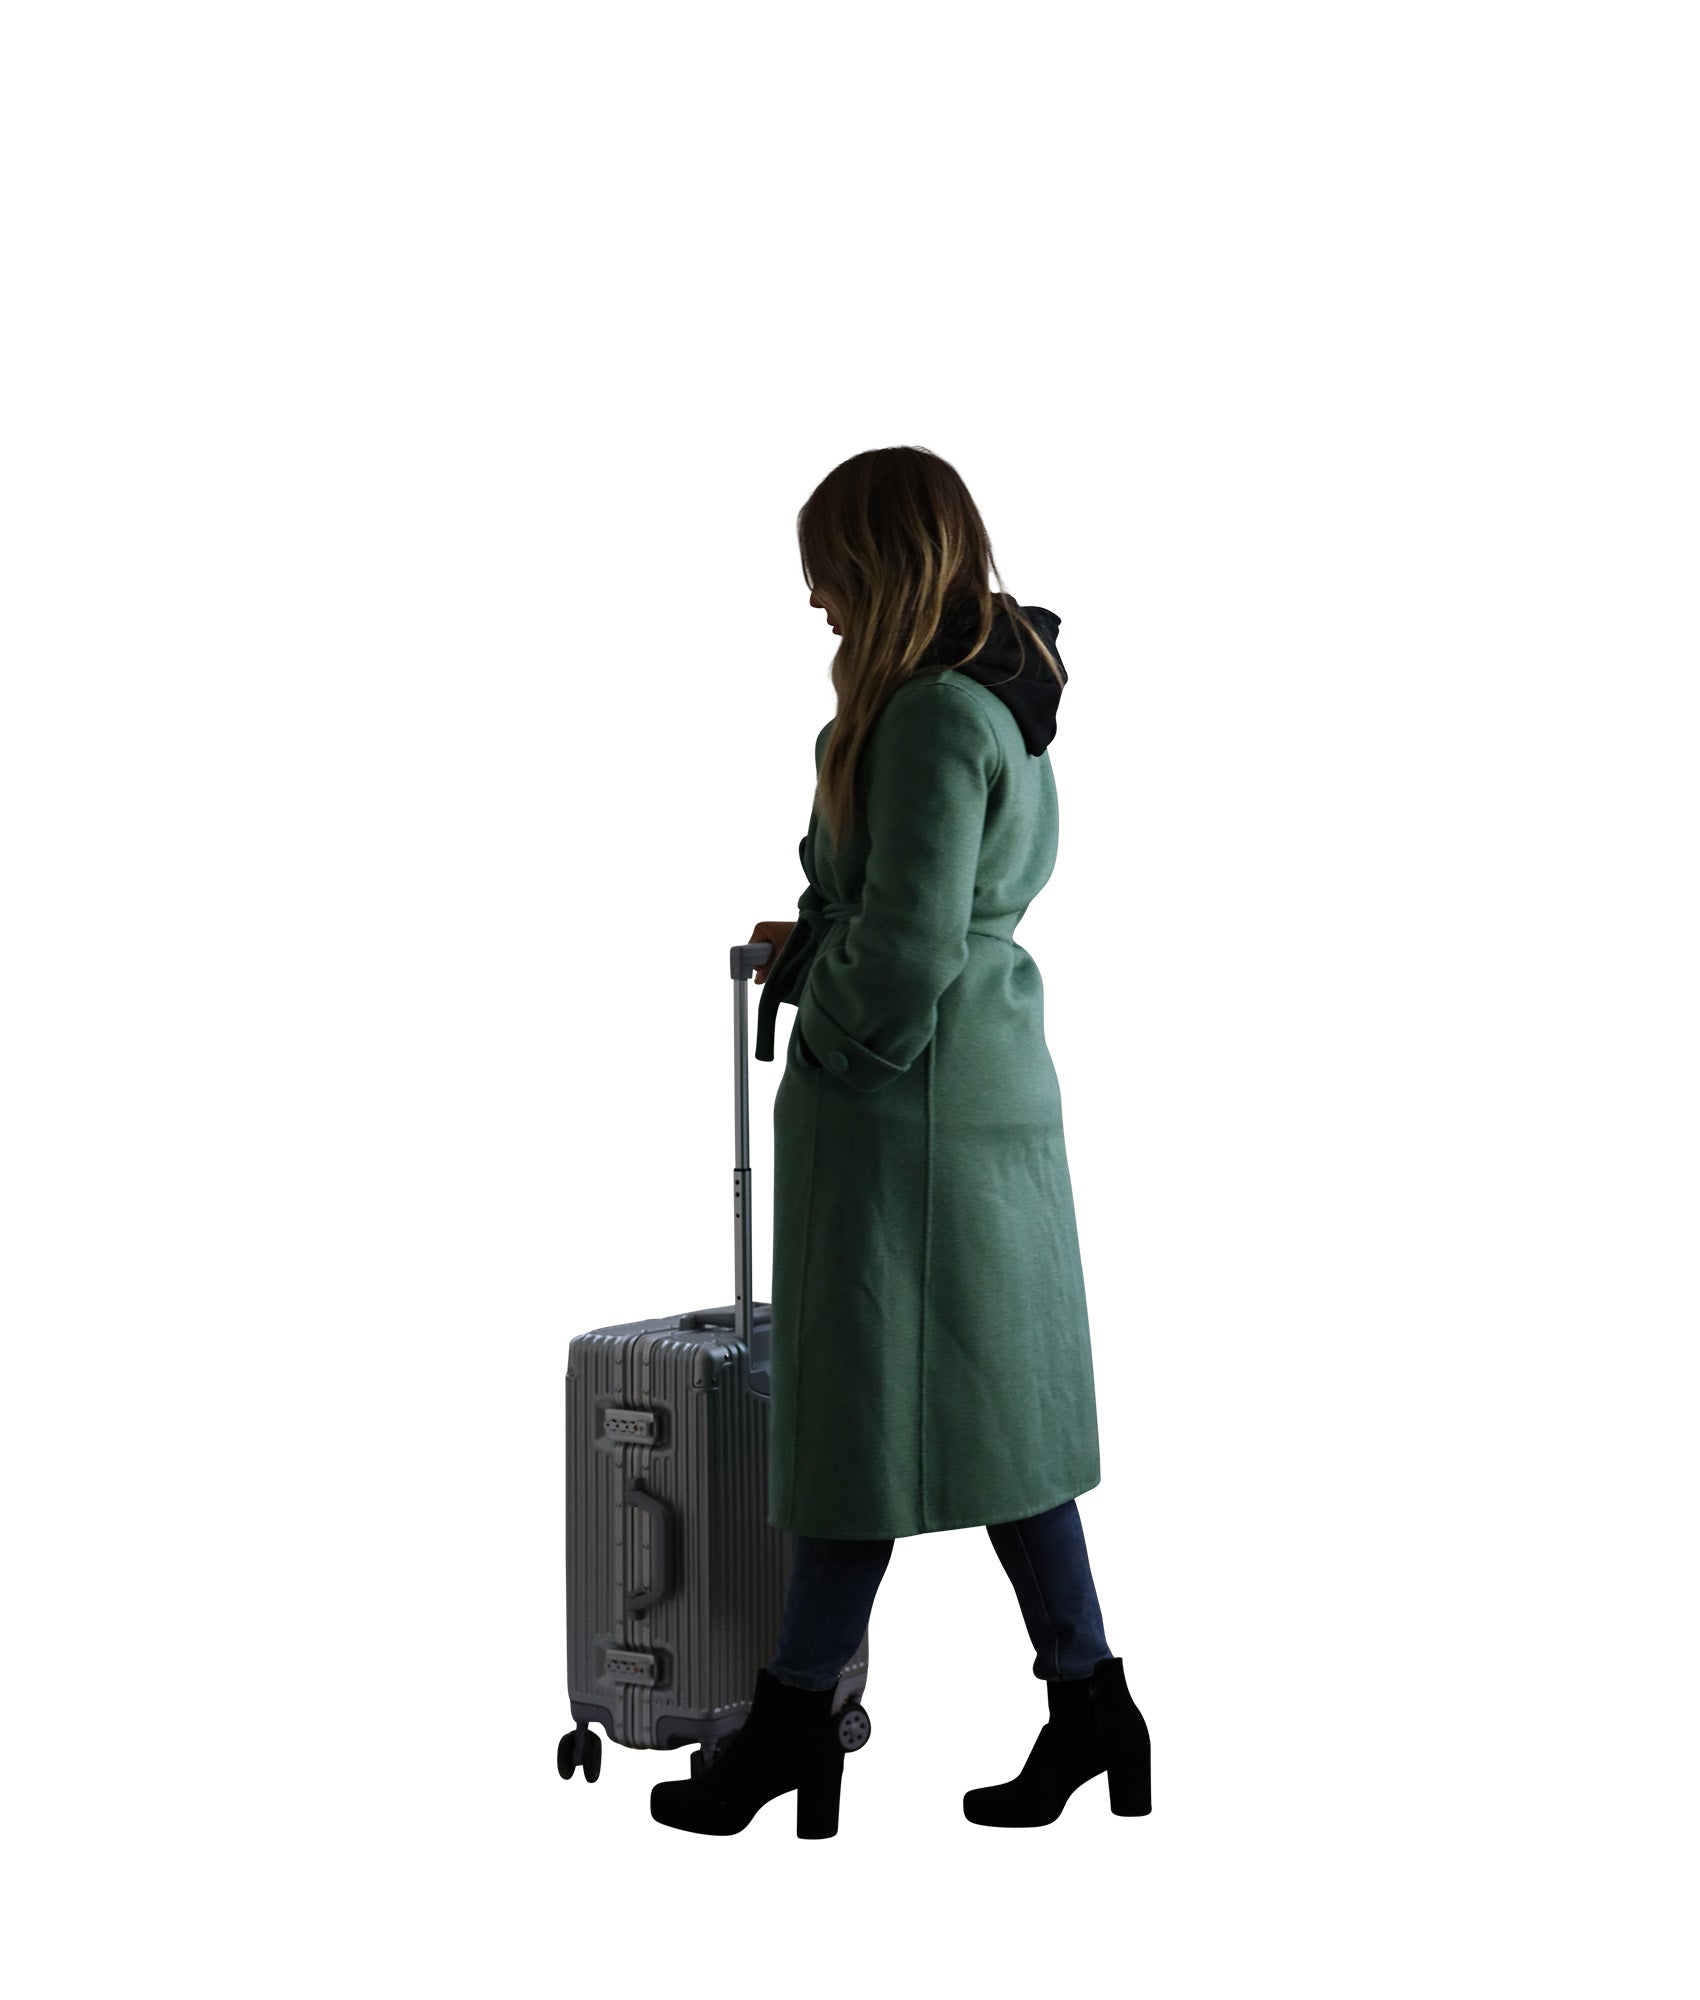 Cutout People Package - Airport / Terminal